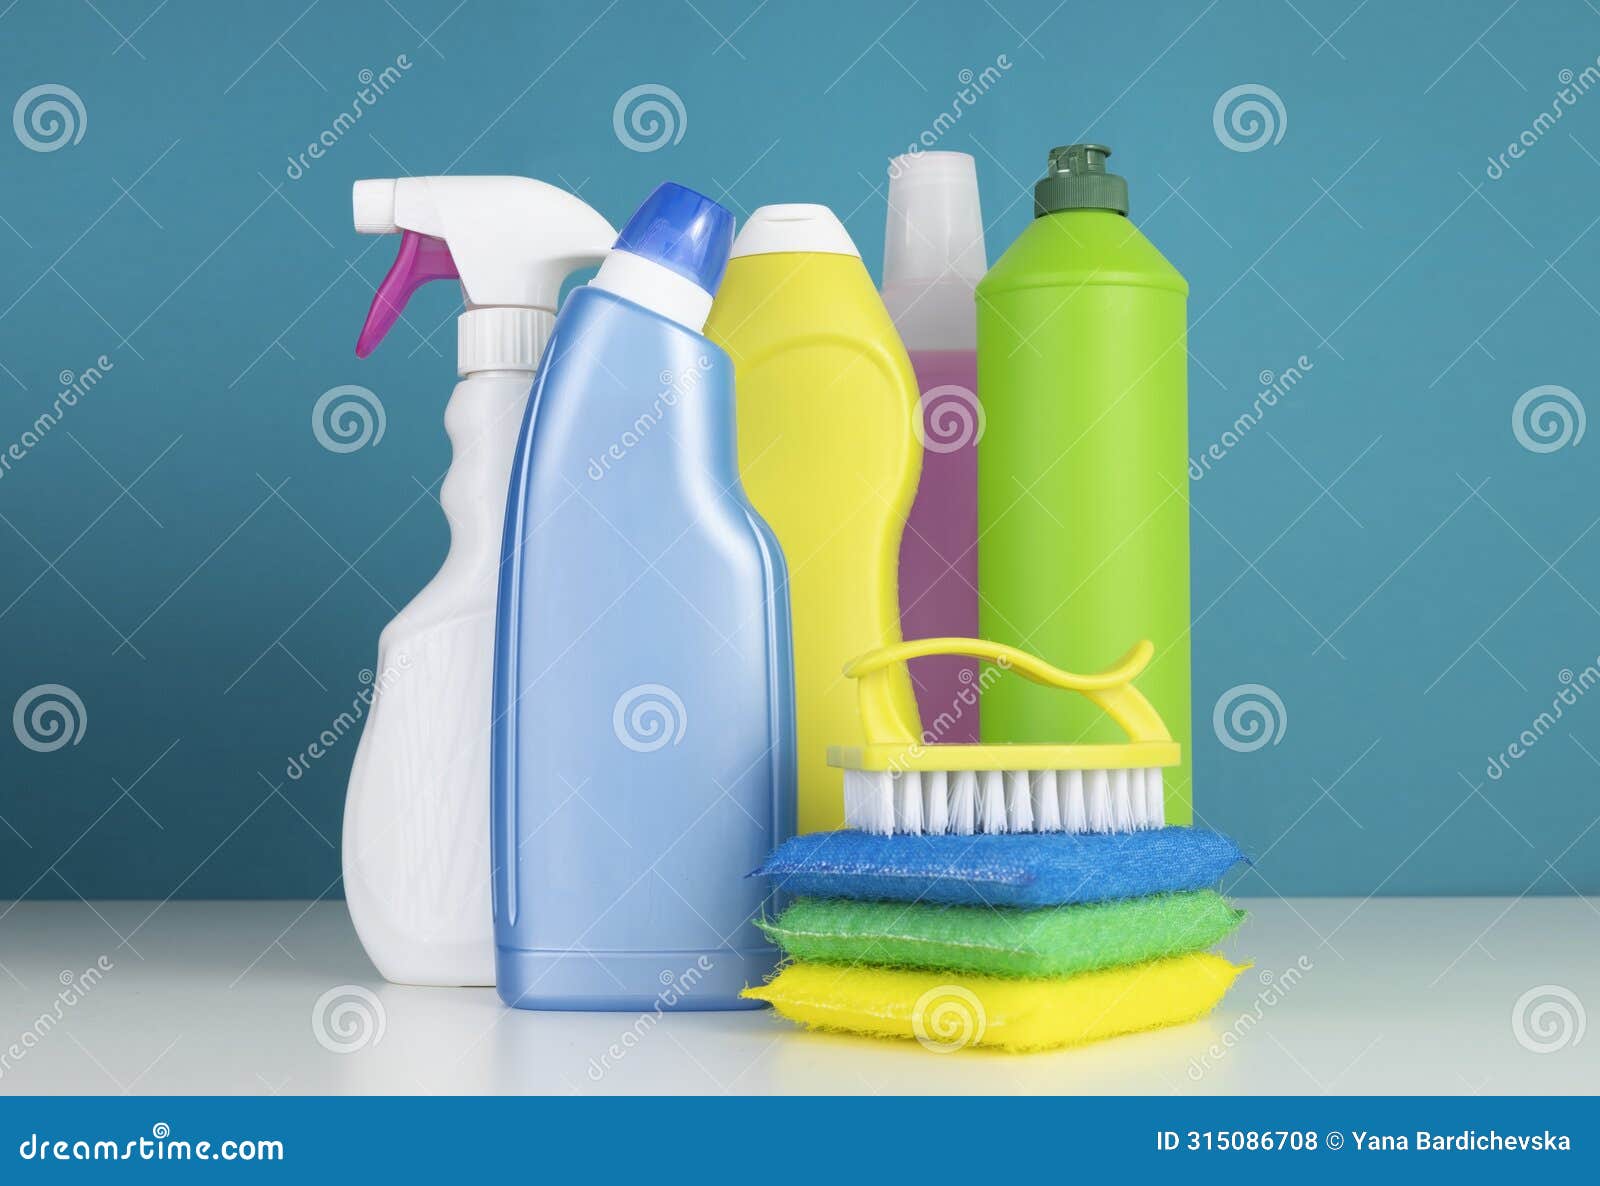 sanitary items,cleaners.colorful plastic sanitizing bottles.desinfectants